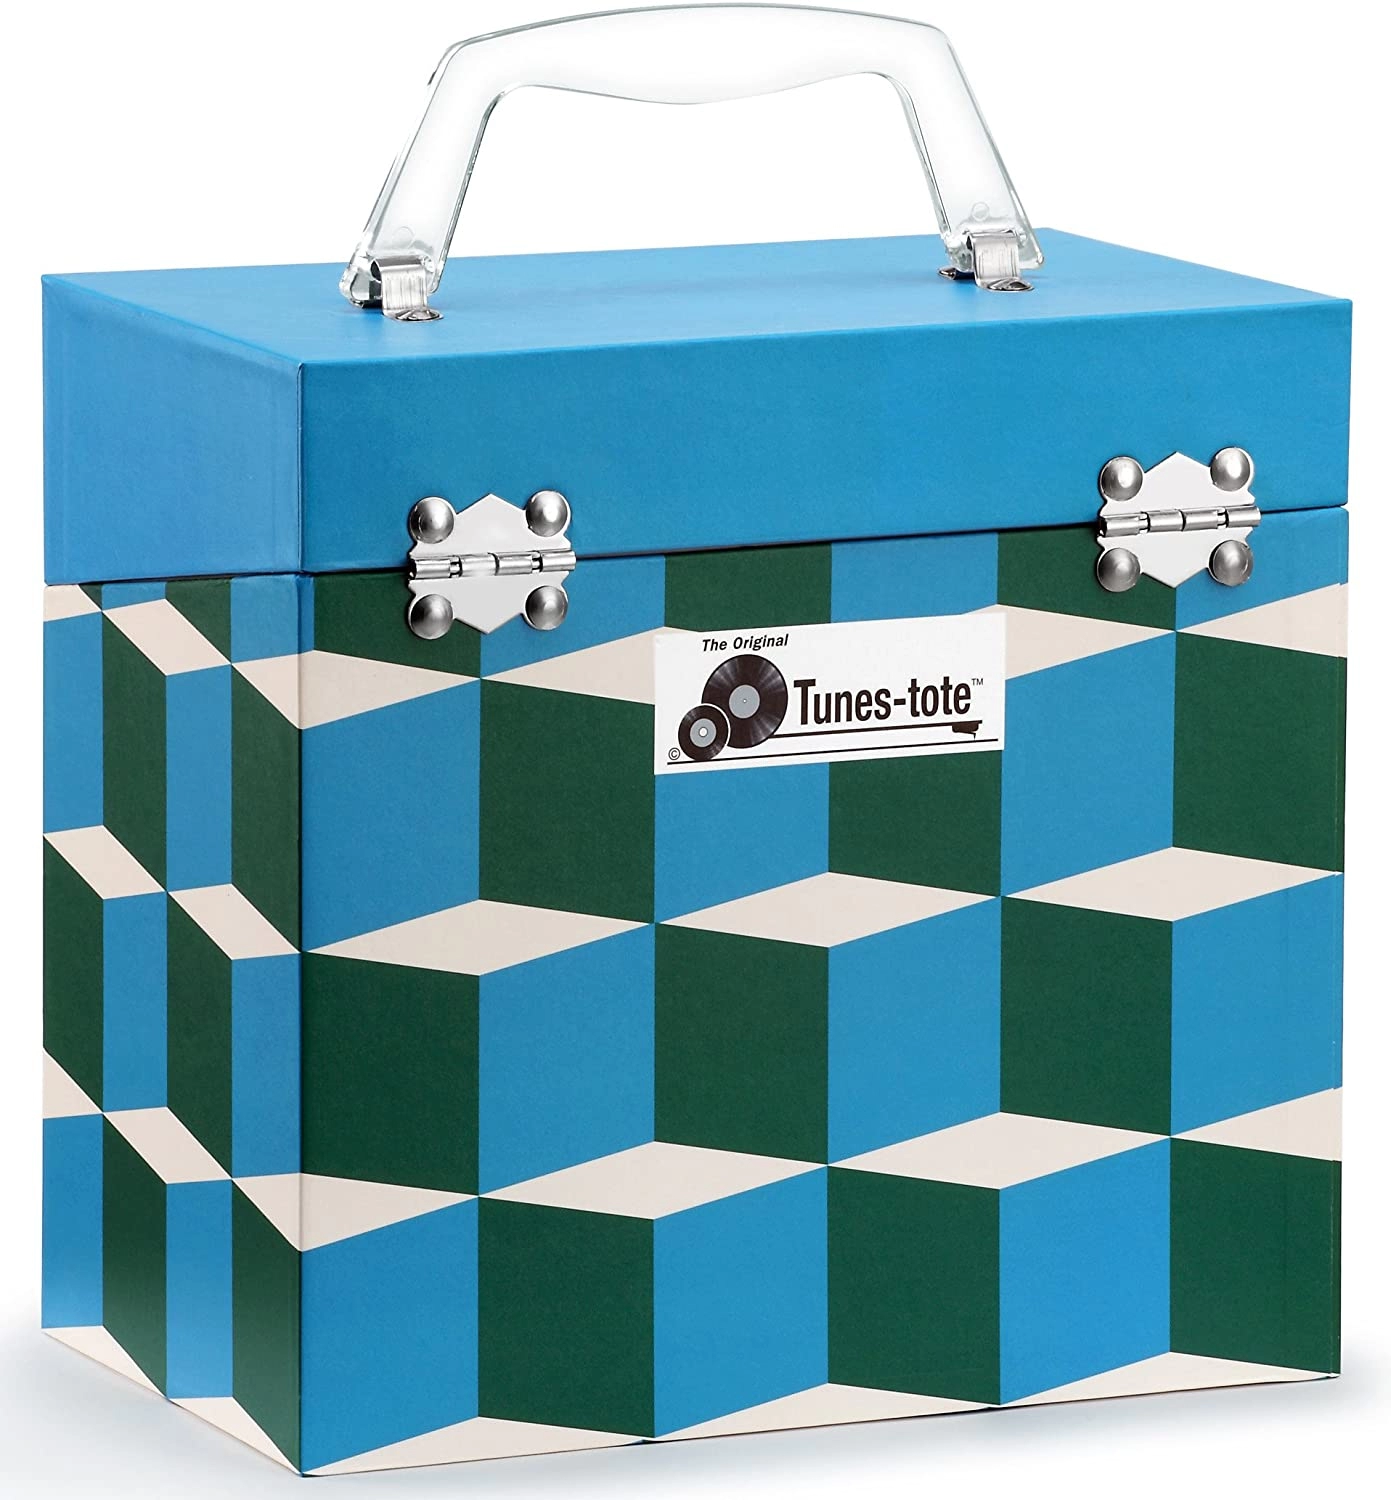 Light Blue - 7" 50 Record Storge Carry Case Record Box